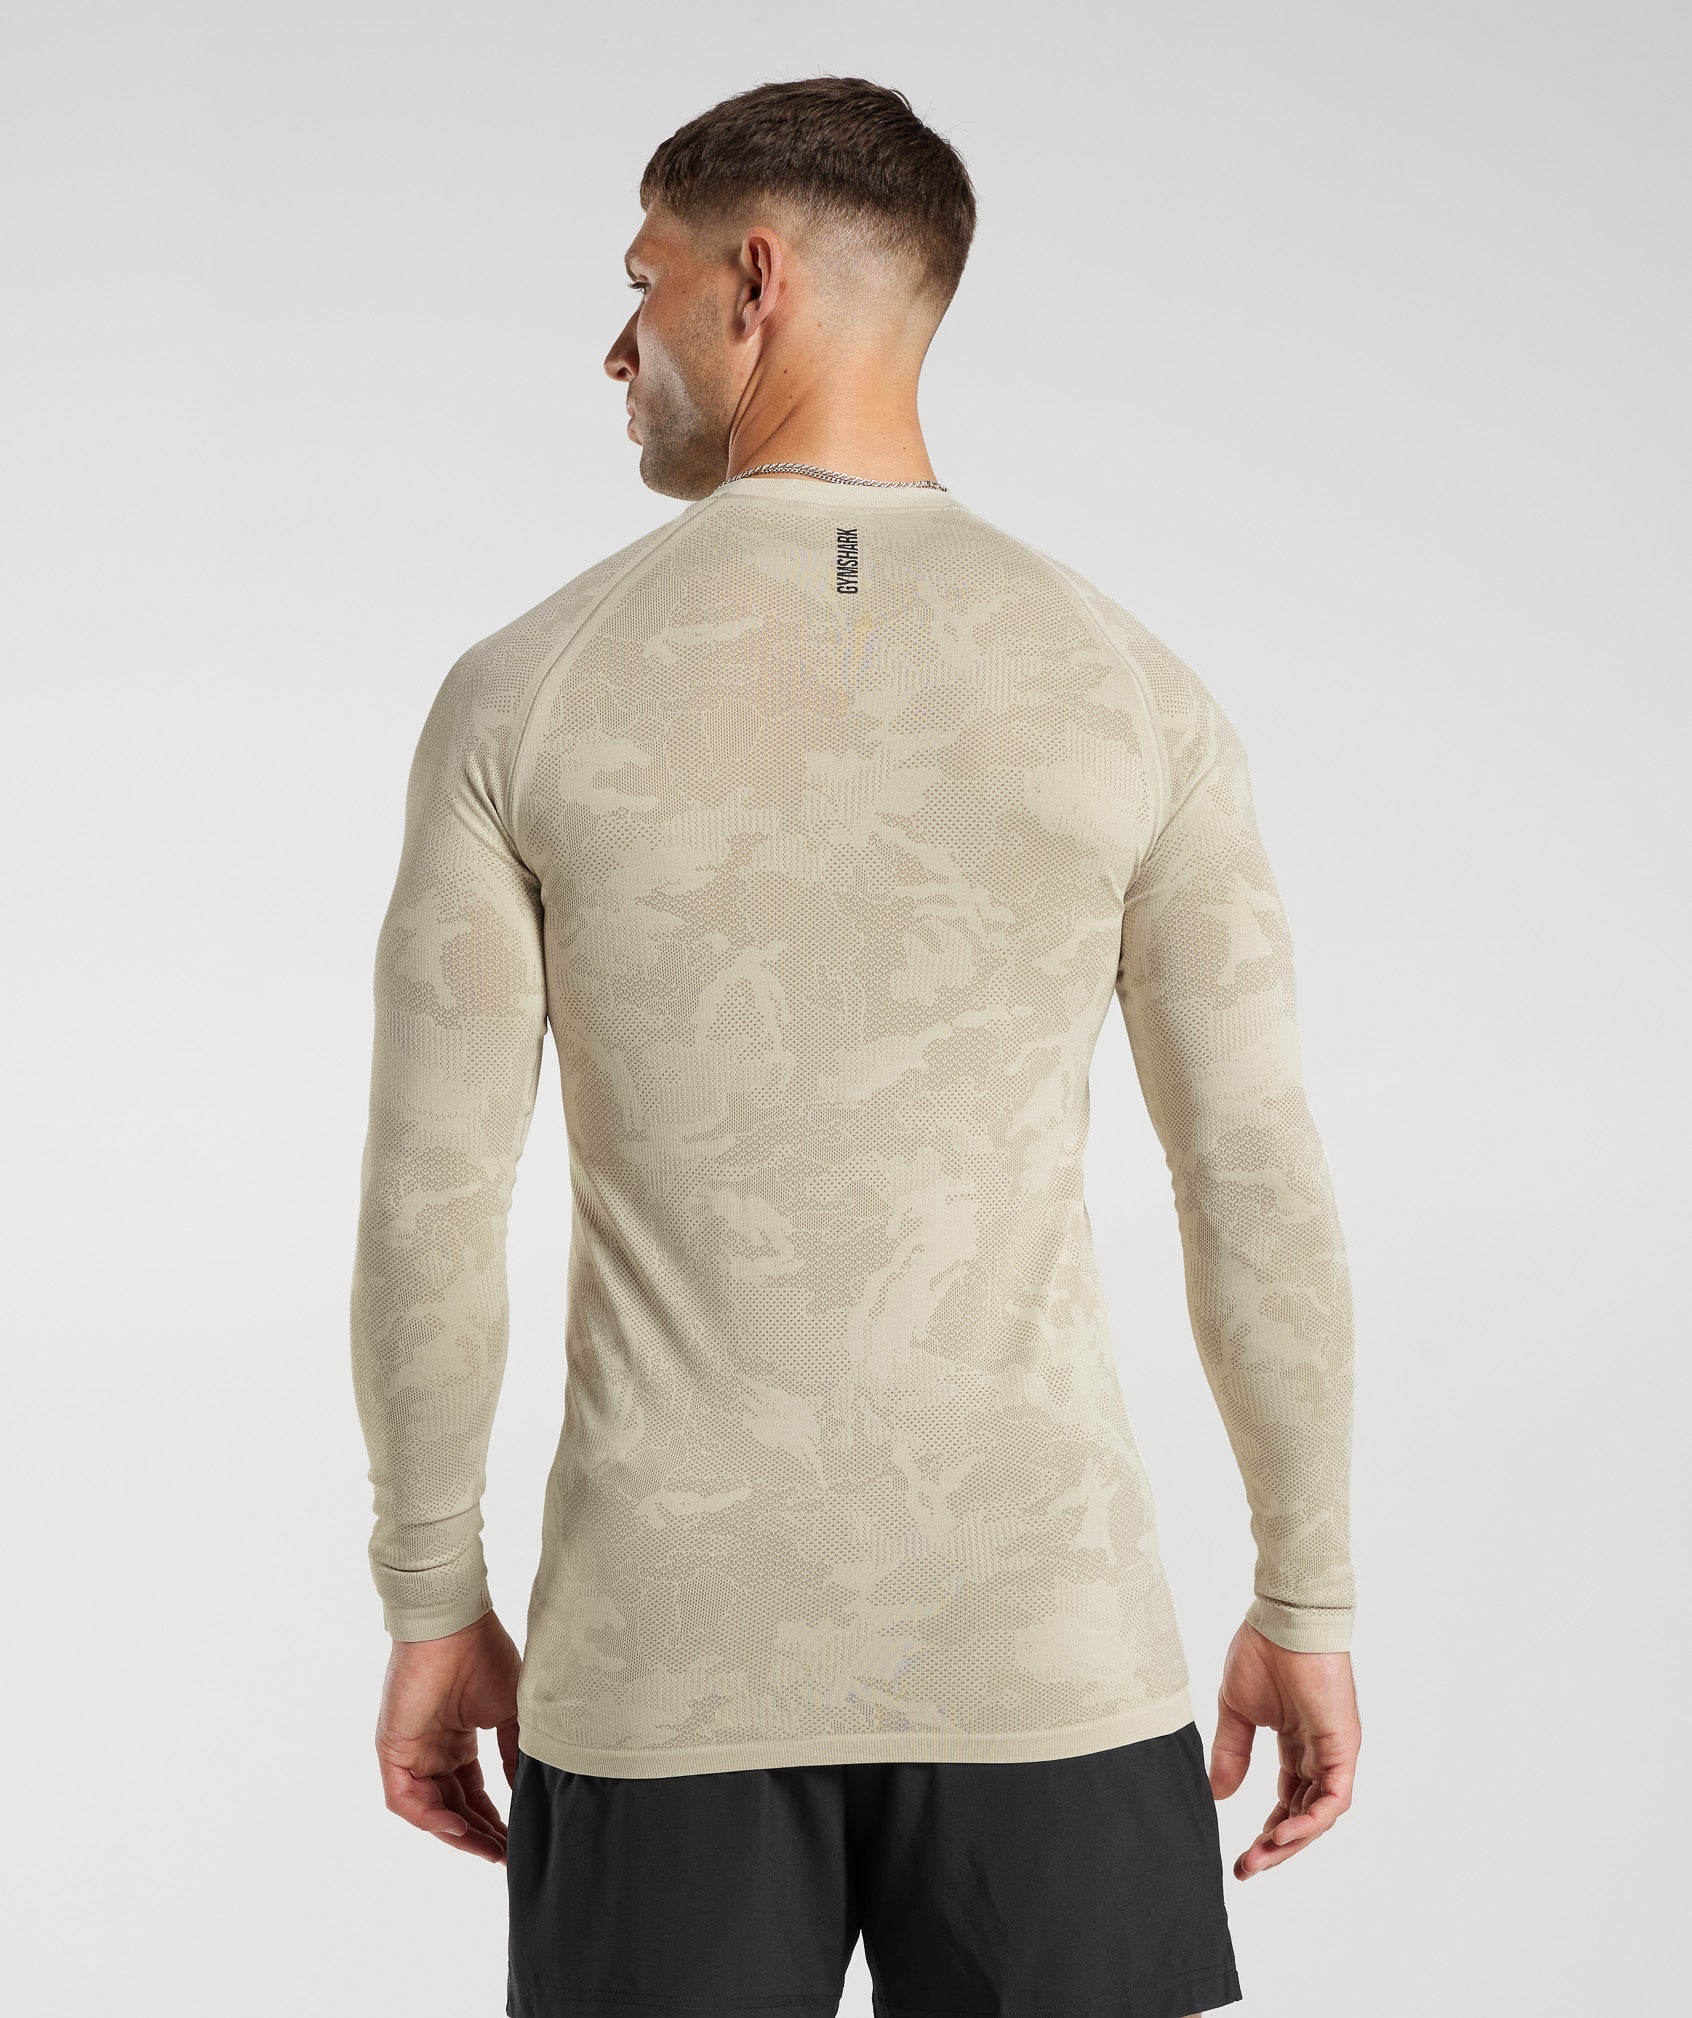 Geo Seamless Long Sleeve T-Shirt in Pebble Grey/Cement Brown - view 2